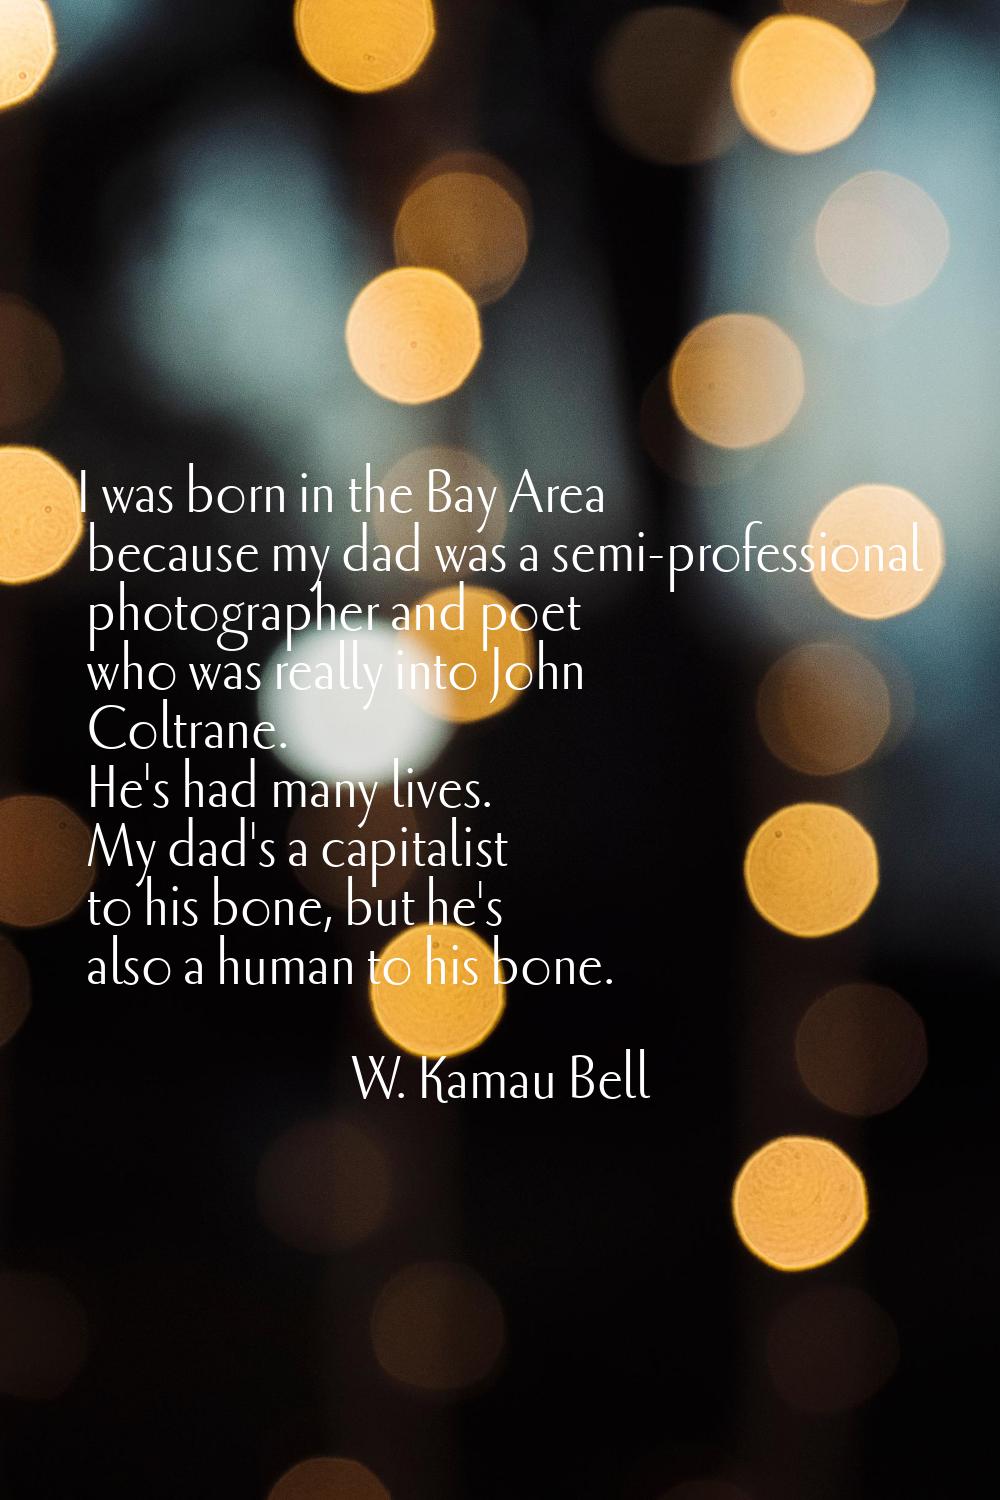 I was born in the Bay Area because my dad was a semi-professional photographer and poet who was rea